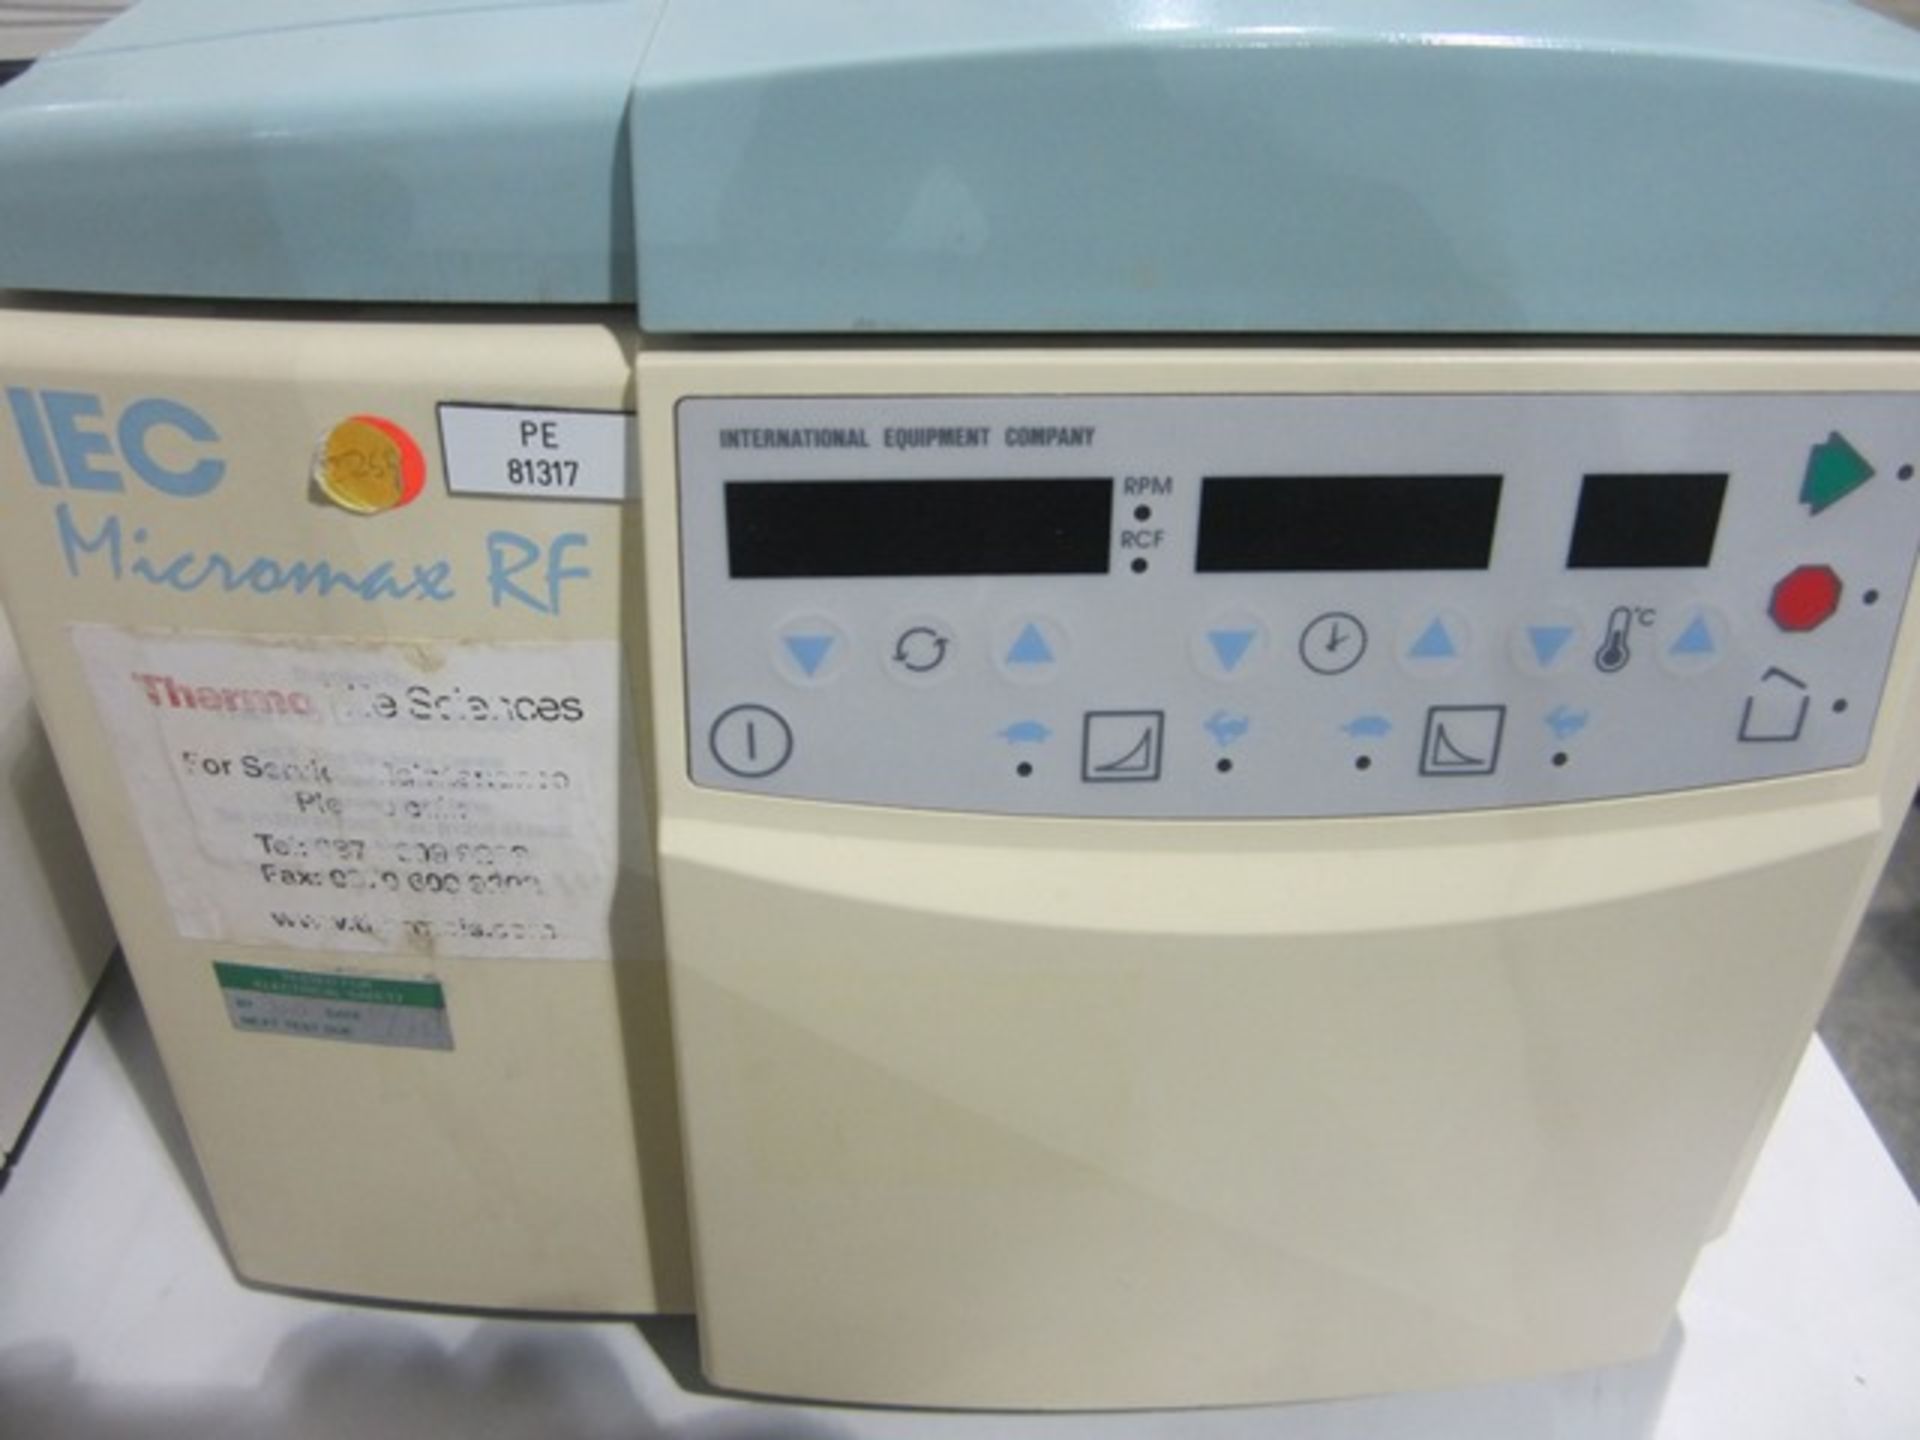 Thermo Life Sciences IEC Micromass RF mass spectrometer